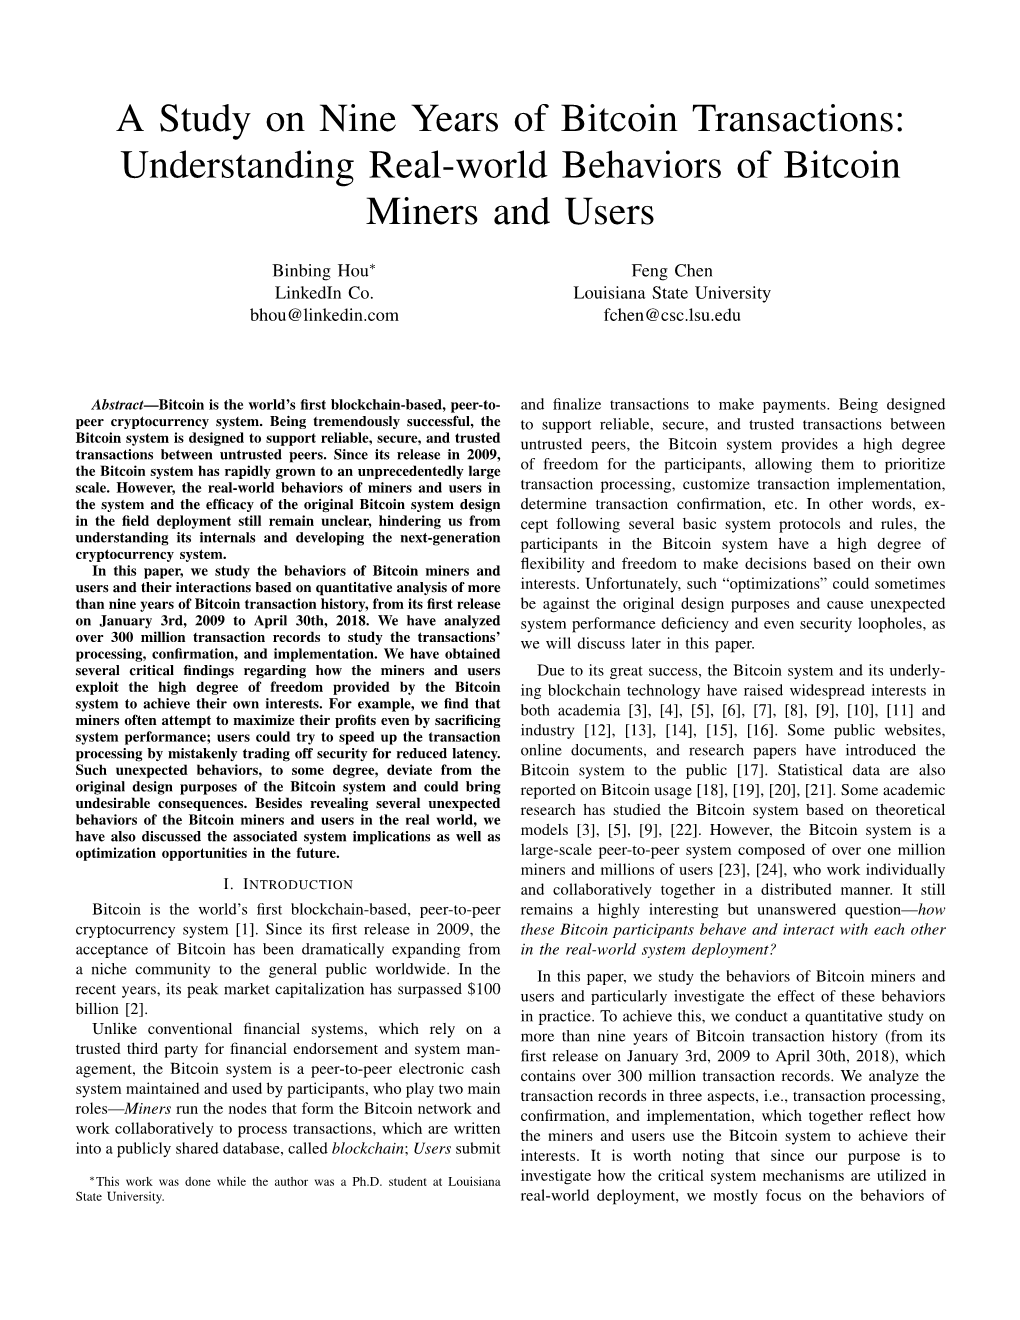 A Study on Nine Years of Bitcoin Transactions: Understanding Real-World Behaviors of Bitcoin Miners and Users